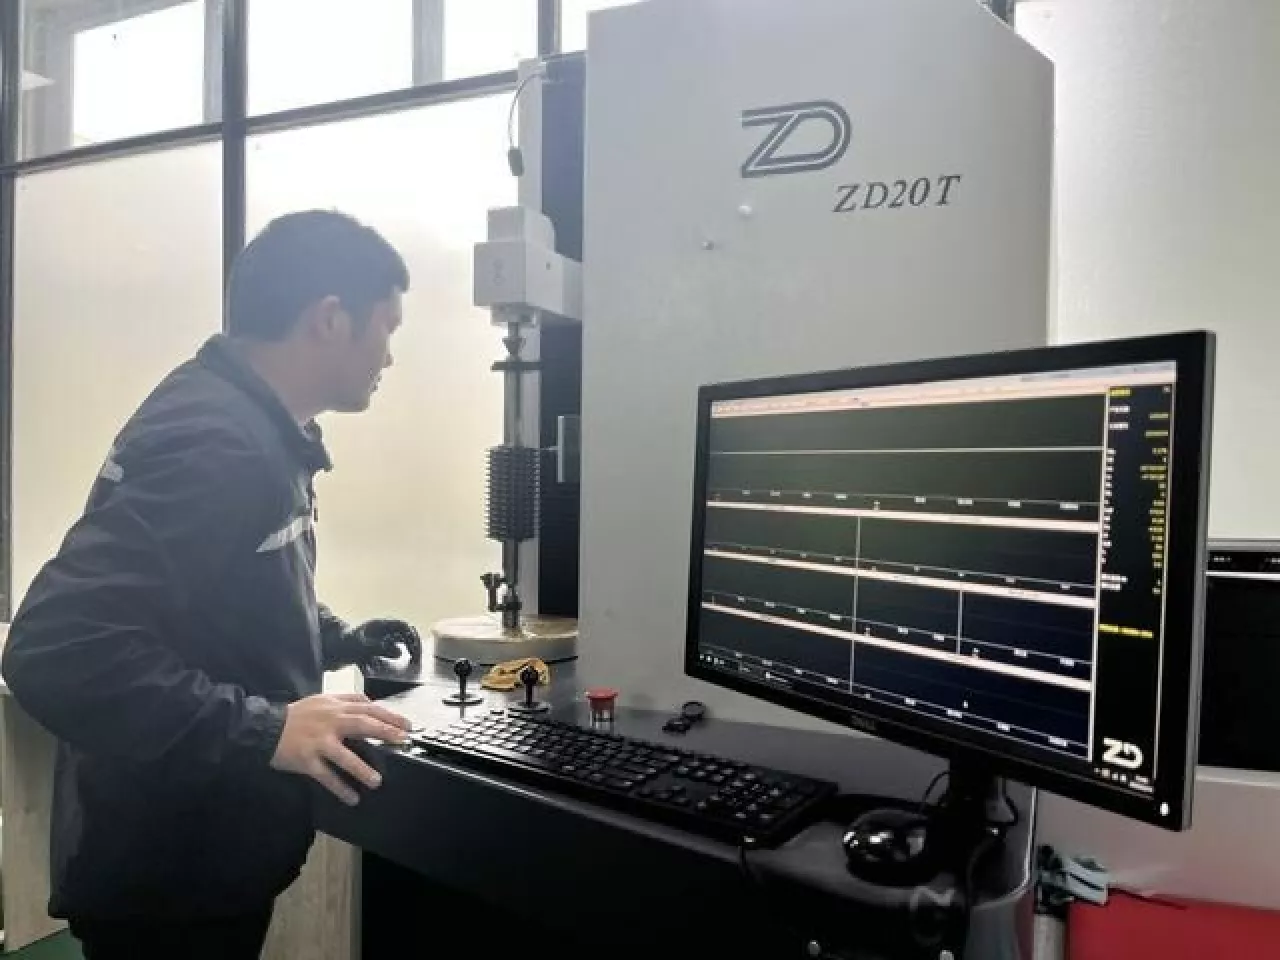 A technician from Guizhou Anxin Numerical Control Technology Co., Ltd. skillfully operates a device. img#1